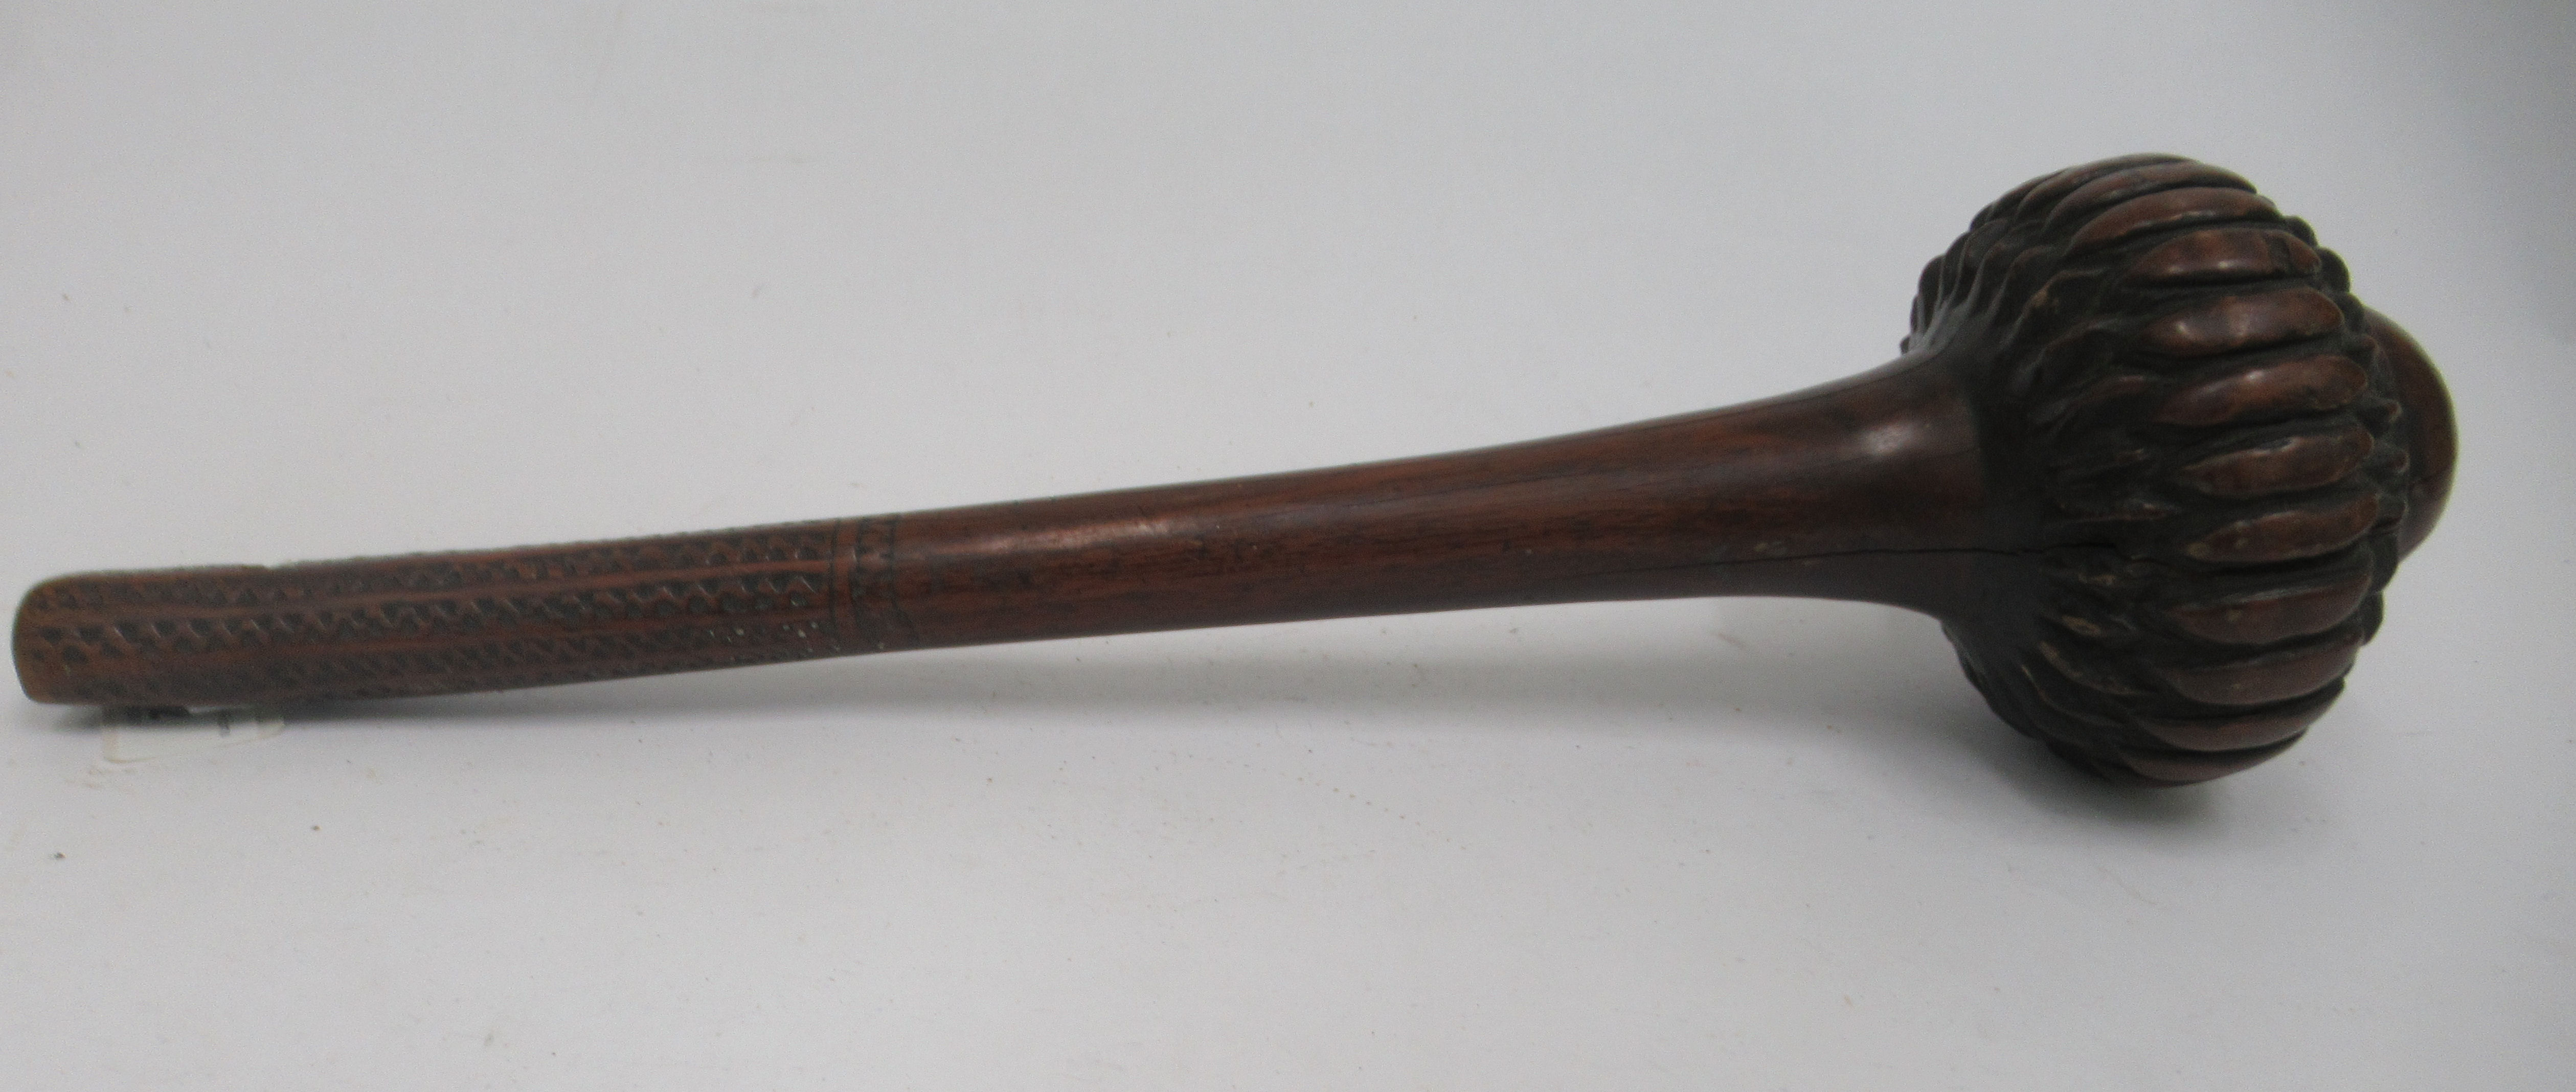 A late 19thC Fijian hardwood Iula Tavatava throwing club, the handle carved with geometric patterns - Image 4 of 10